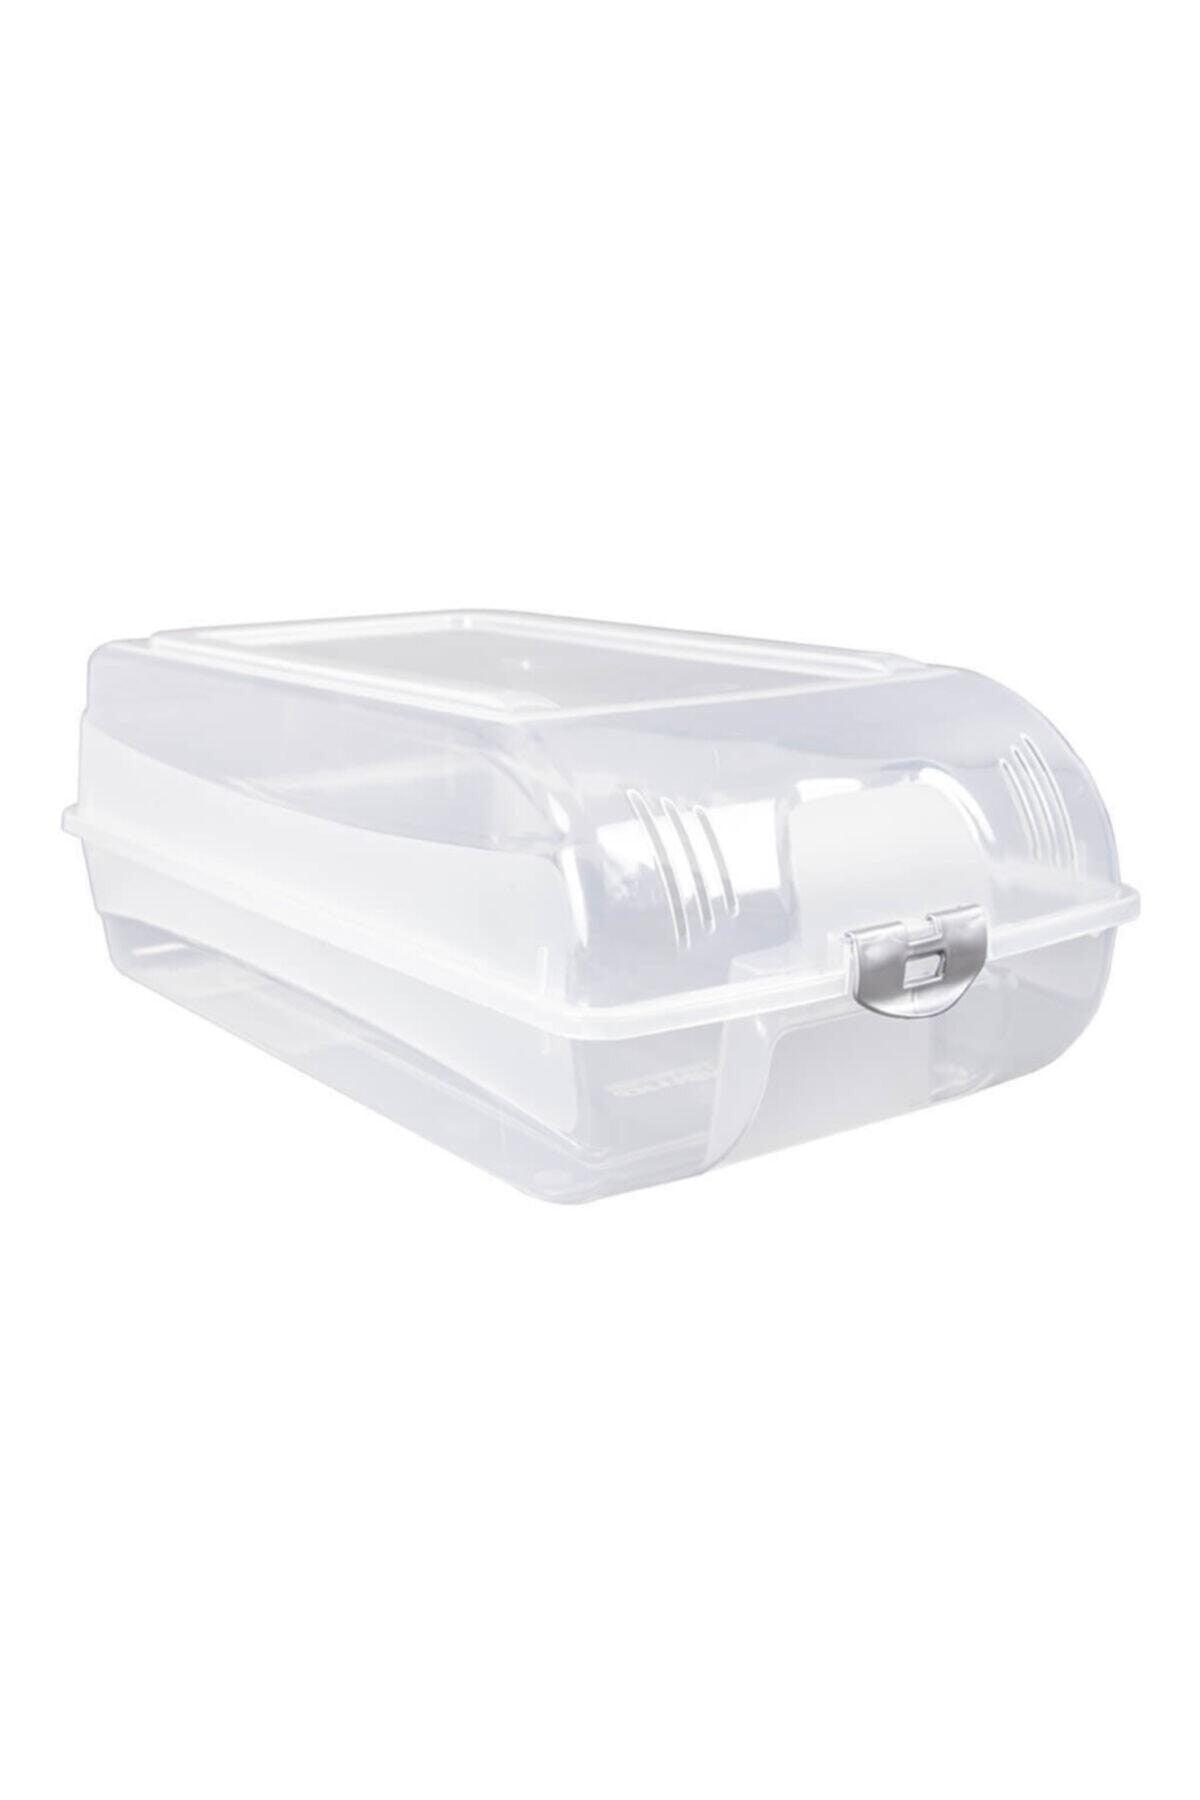 Shoe Storage And Protection Box 1 Piece - Swordslife